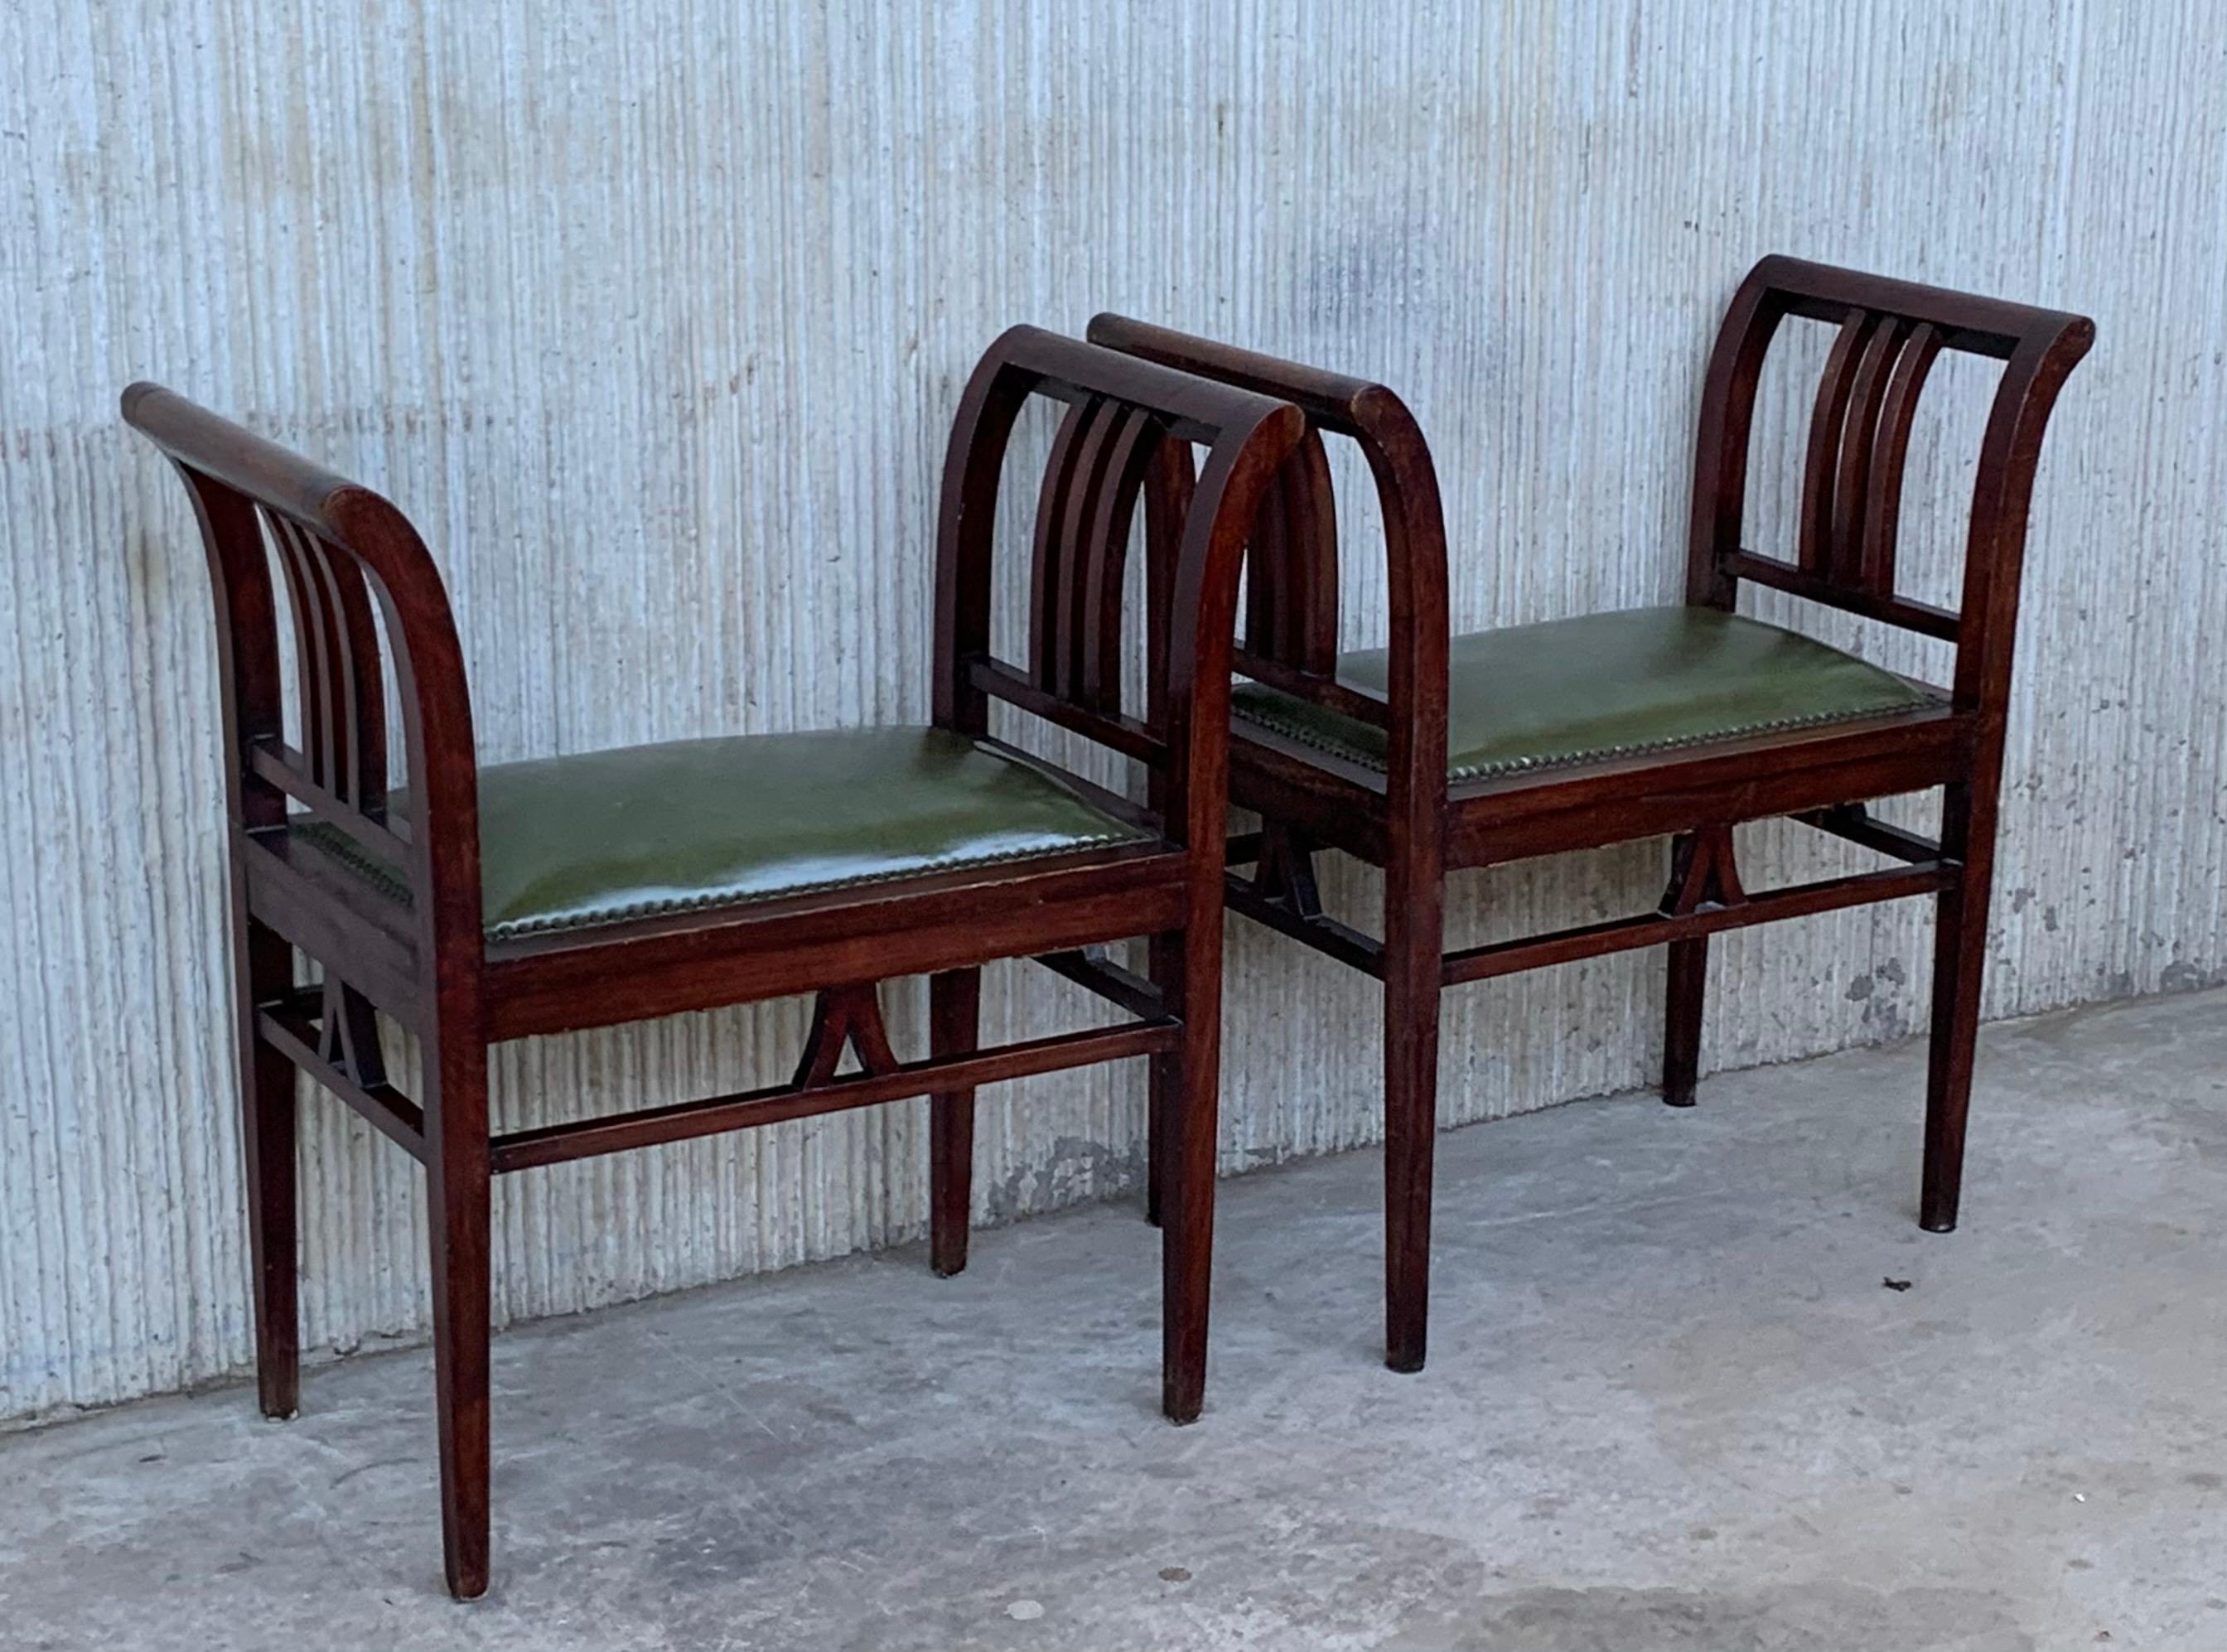 Set of Four Art Deco Stools in Walnut with Arms and Seat Leather In Good Condition For Sale In Miami, FL